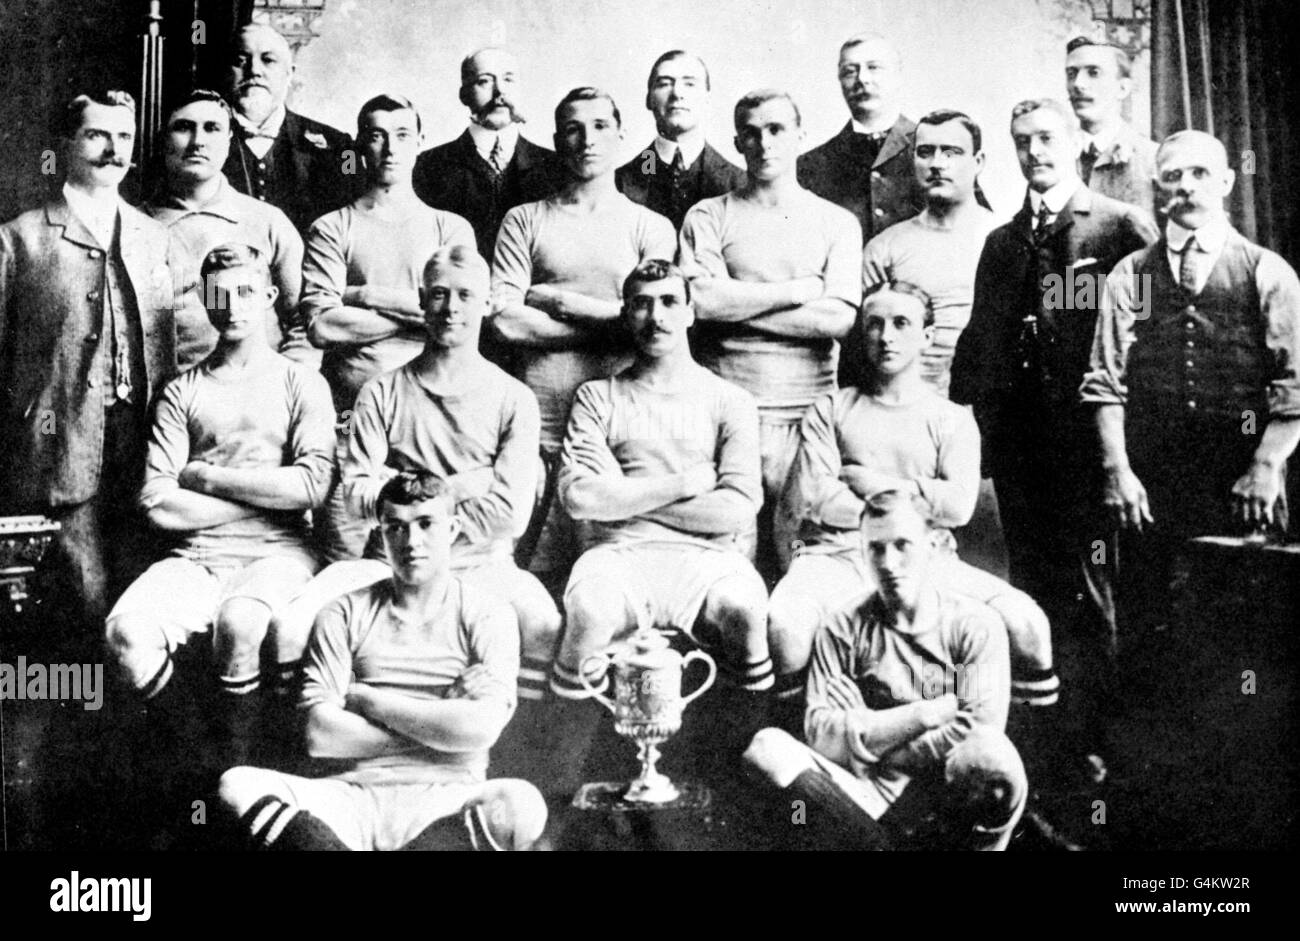 Manchester City football team, winners of the FA Cup 1904. Back Row: J Parlby, C H Waterhouse, E Hulton (Chairman), J E Chapman, G Madders. Second Row: T E Maley (Secretary & Manager), J Hillman, C Livingstone, J McMahon, T Hynds, W Gillespie * L W Furness, J Broad (Trainer). Third Row: F Booth, S Frost, W Meredith (Captain), S Ashworth. Front Row: A Turnbull, H Burgess. Stock Photo